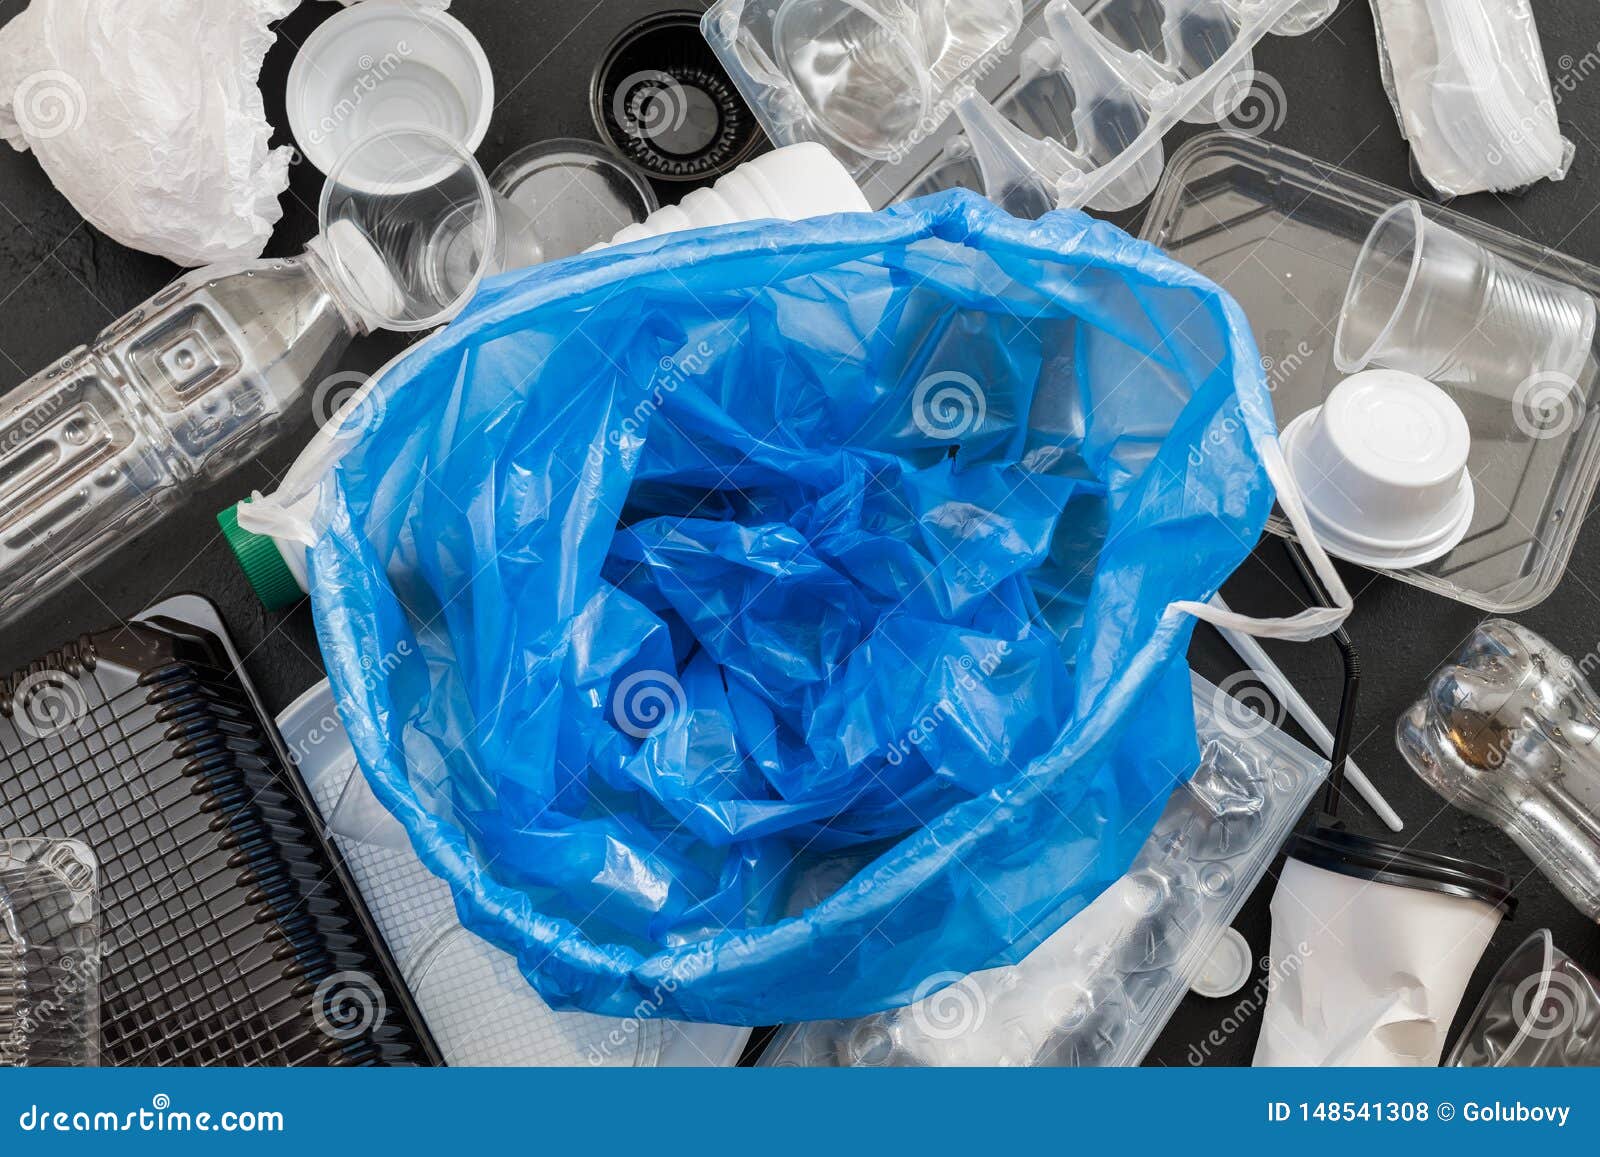 Recycle logo on bins in form of local council authority blue & white  plastic bag sacks for waste management recycling of garbage rubbish England  UK Stock Photo - Alamy